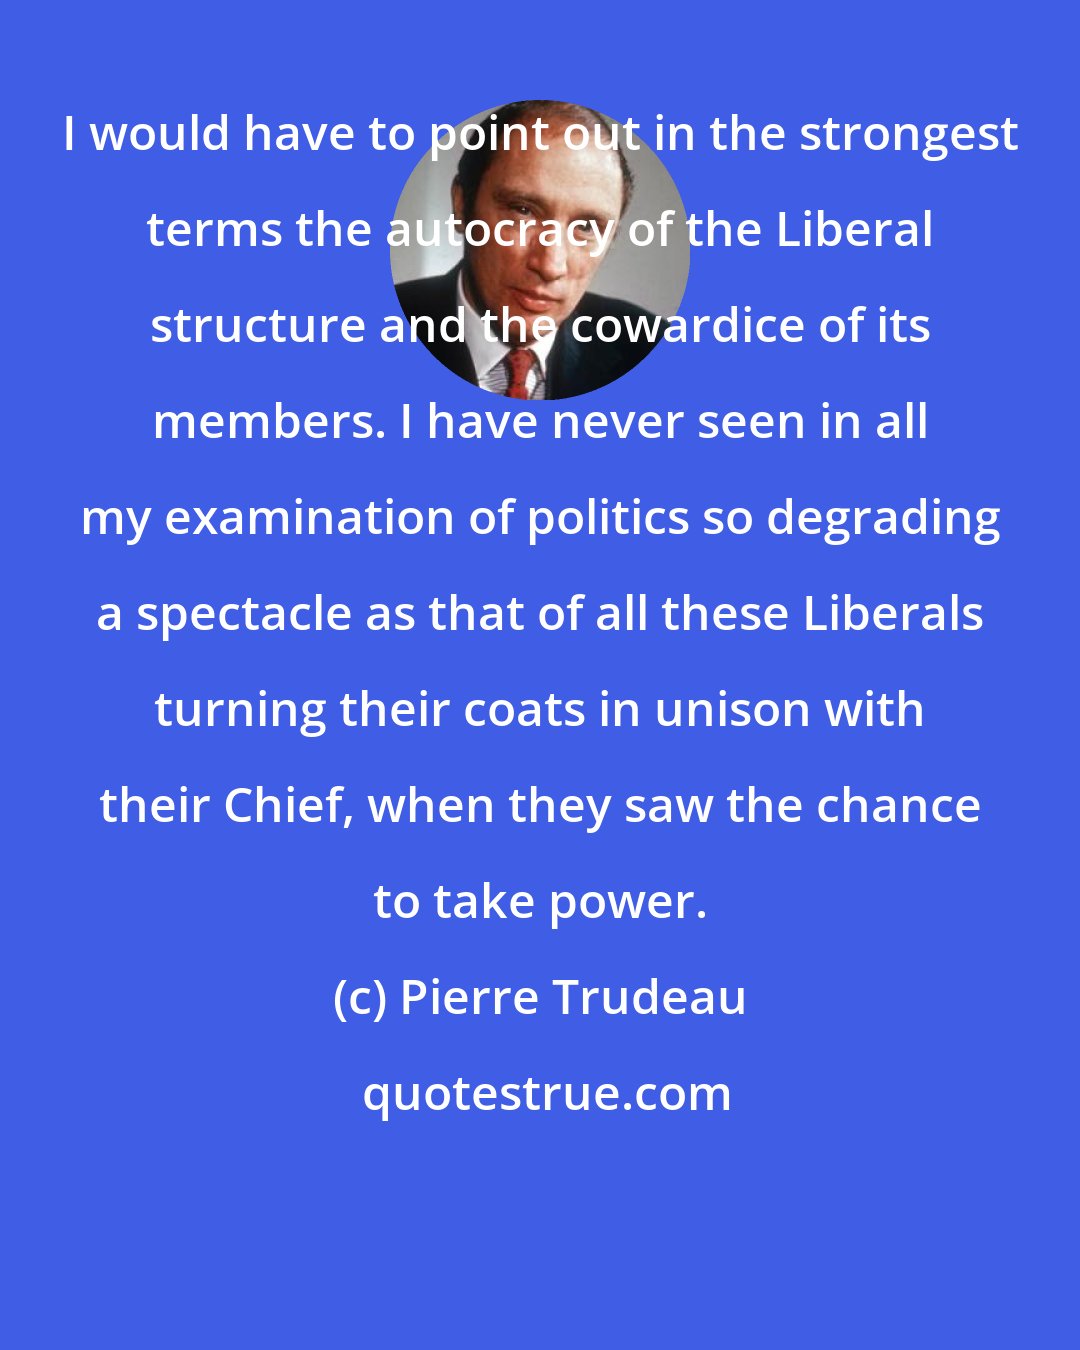 Pierre Trudeau: I would have to point out in the strongest terms the autocracy of the Liberal structure and the cowardice of its members. I have never seen in all my examination of politics so degrading a spectacle as that of all these Liberals turning their coats in unison with their Chief, when they saw the chance to take power.